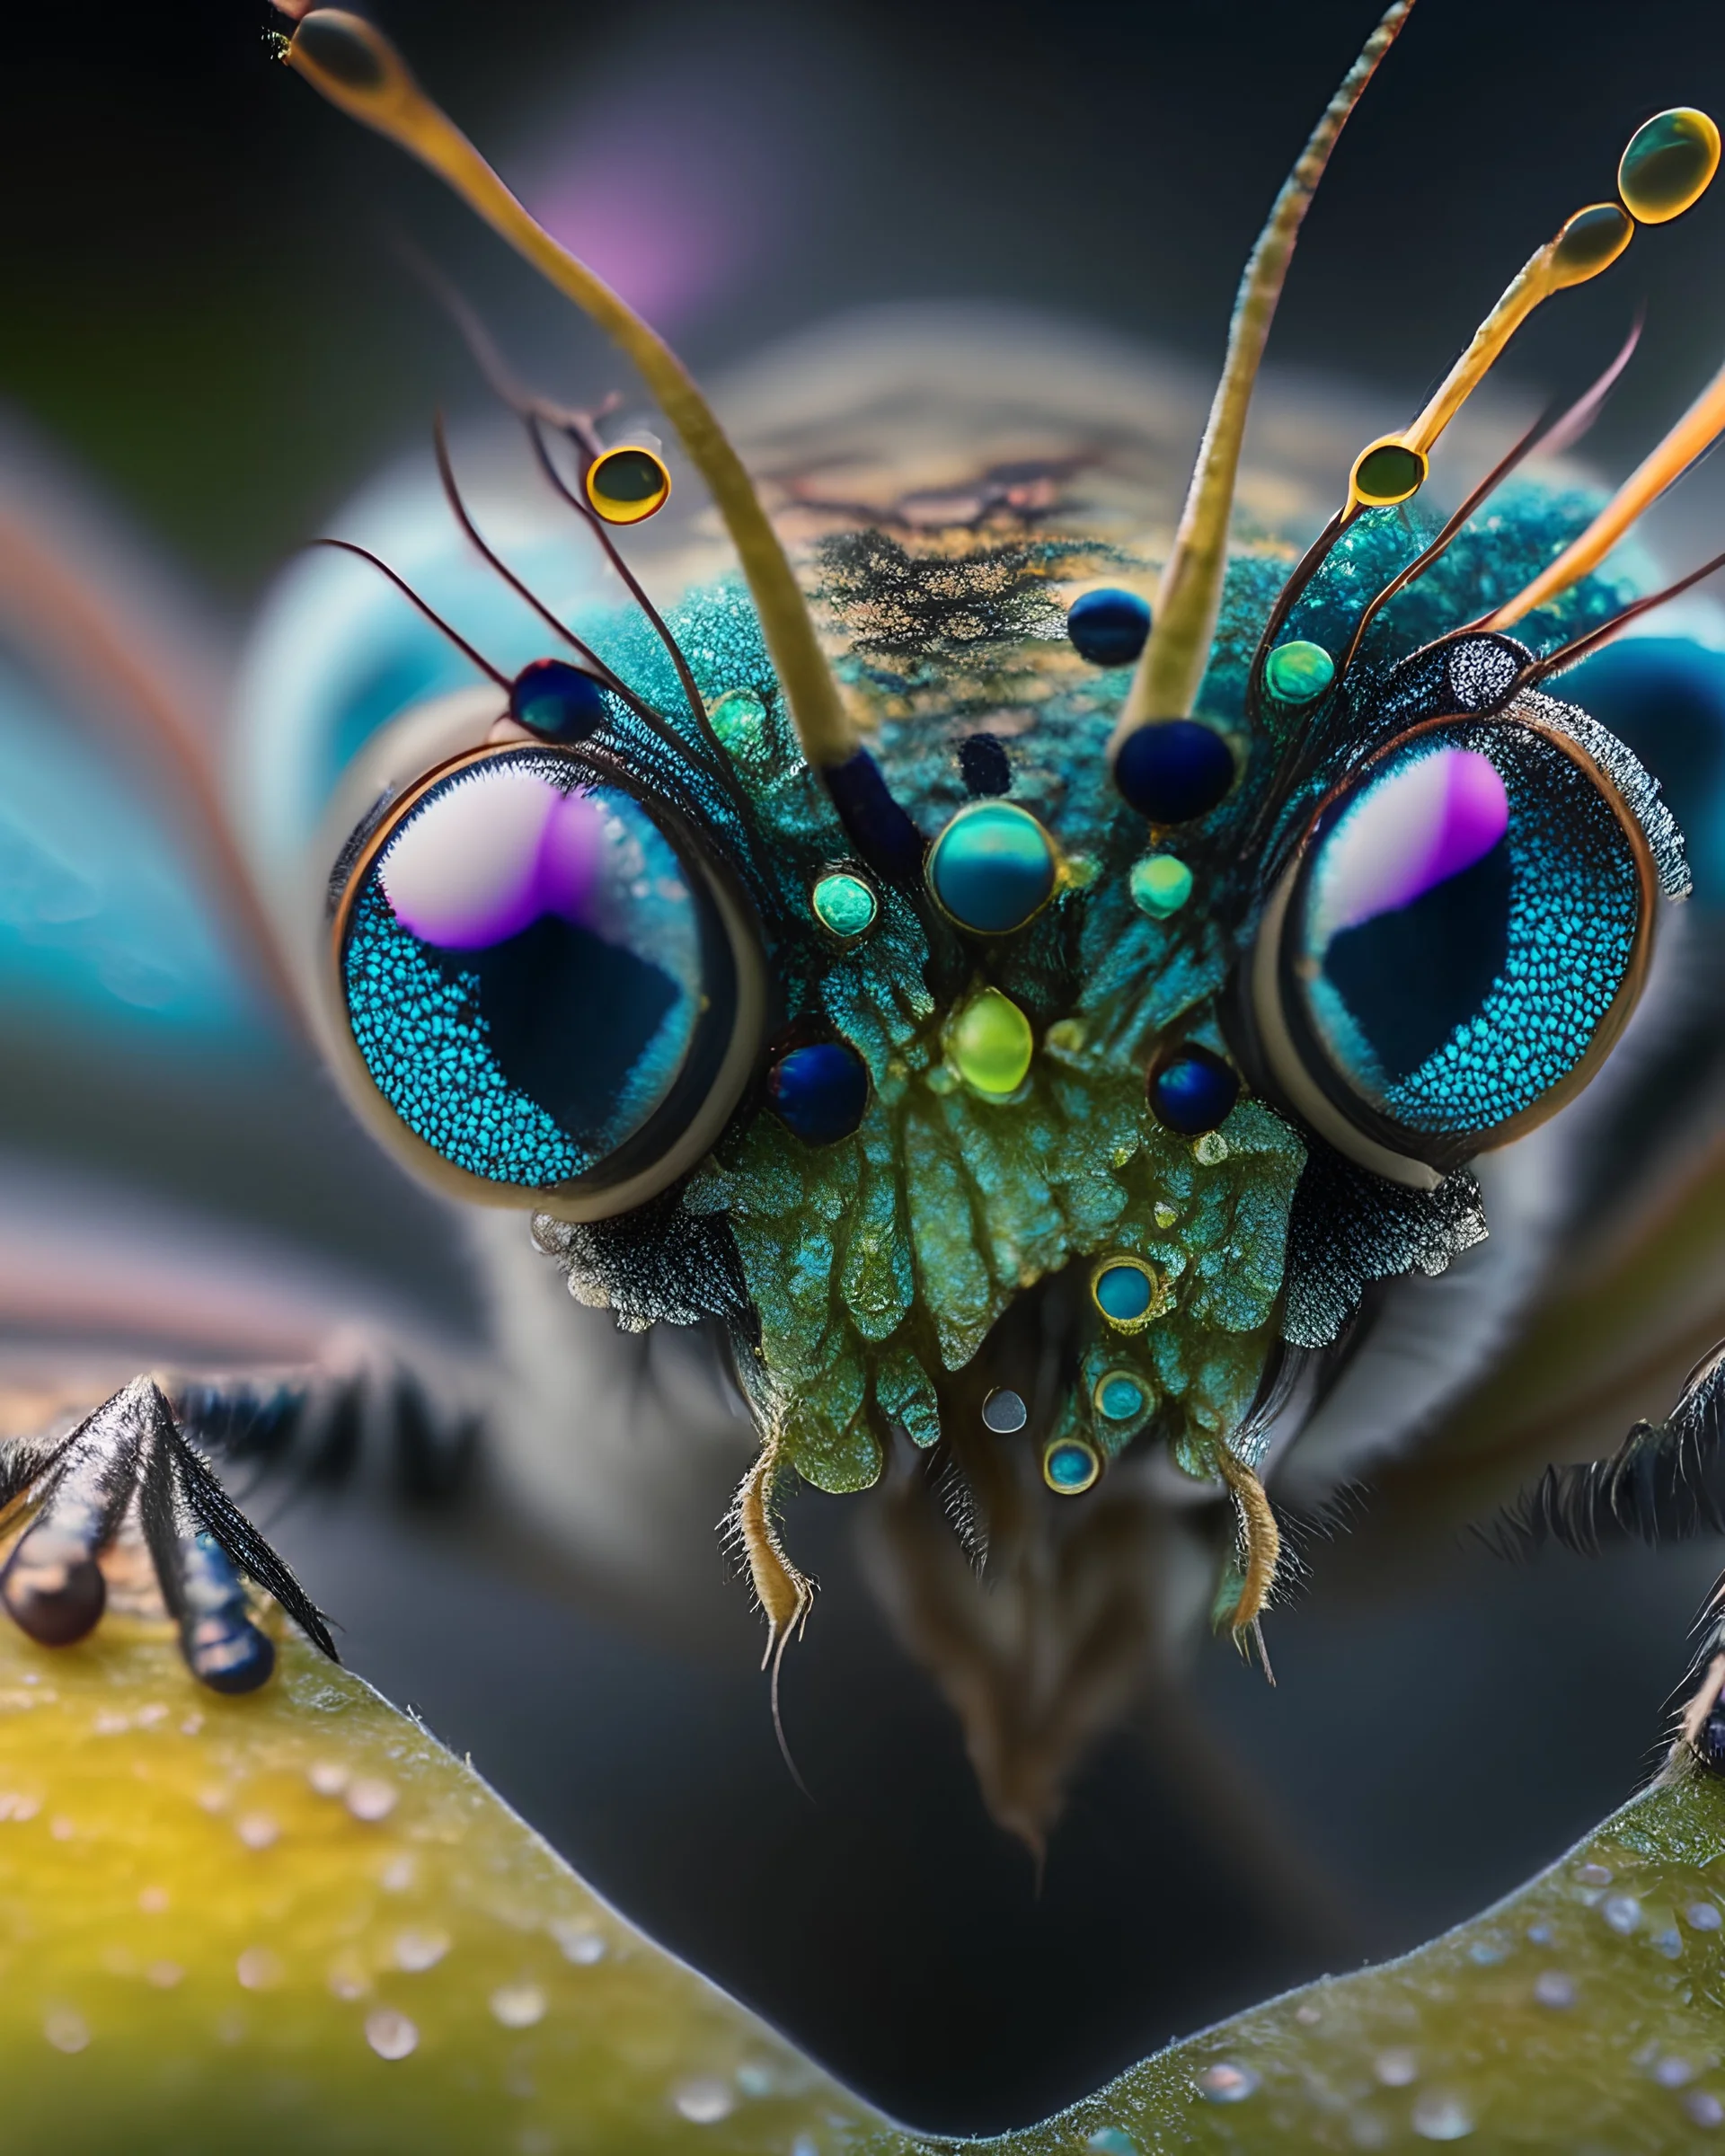 Macro photography workshops led by mystic creatures themselves, teaching photographers how to capture the true essence of these magical beings.